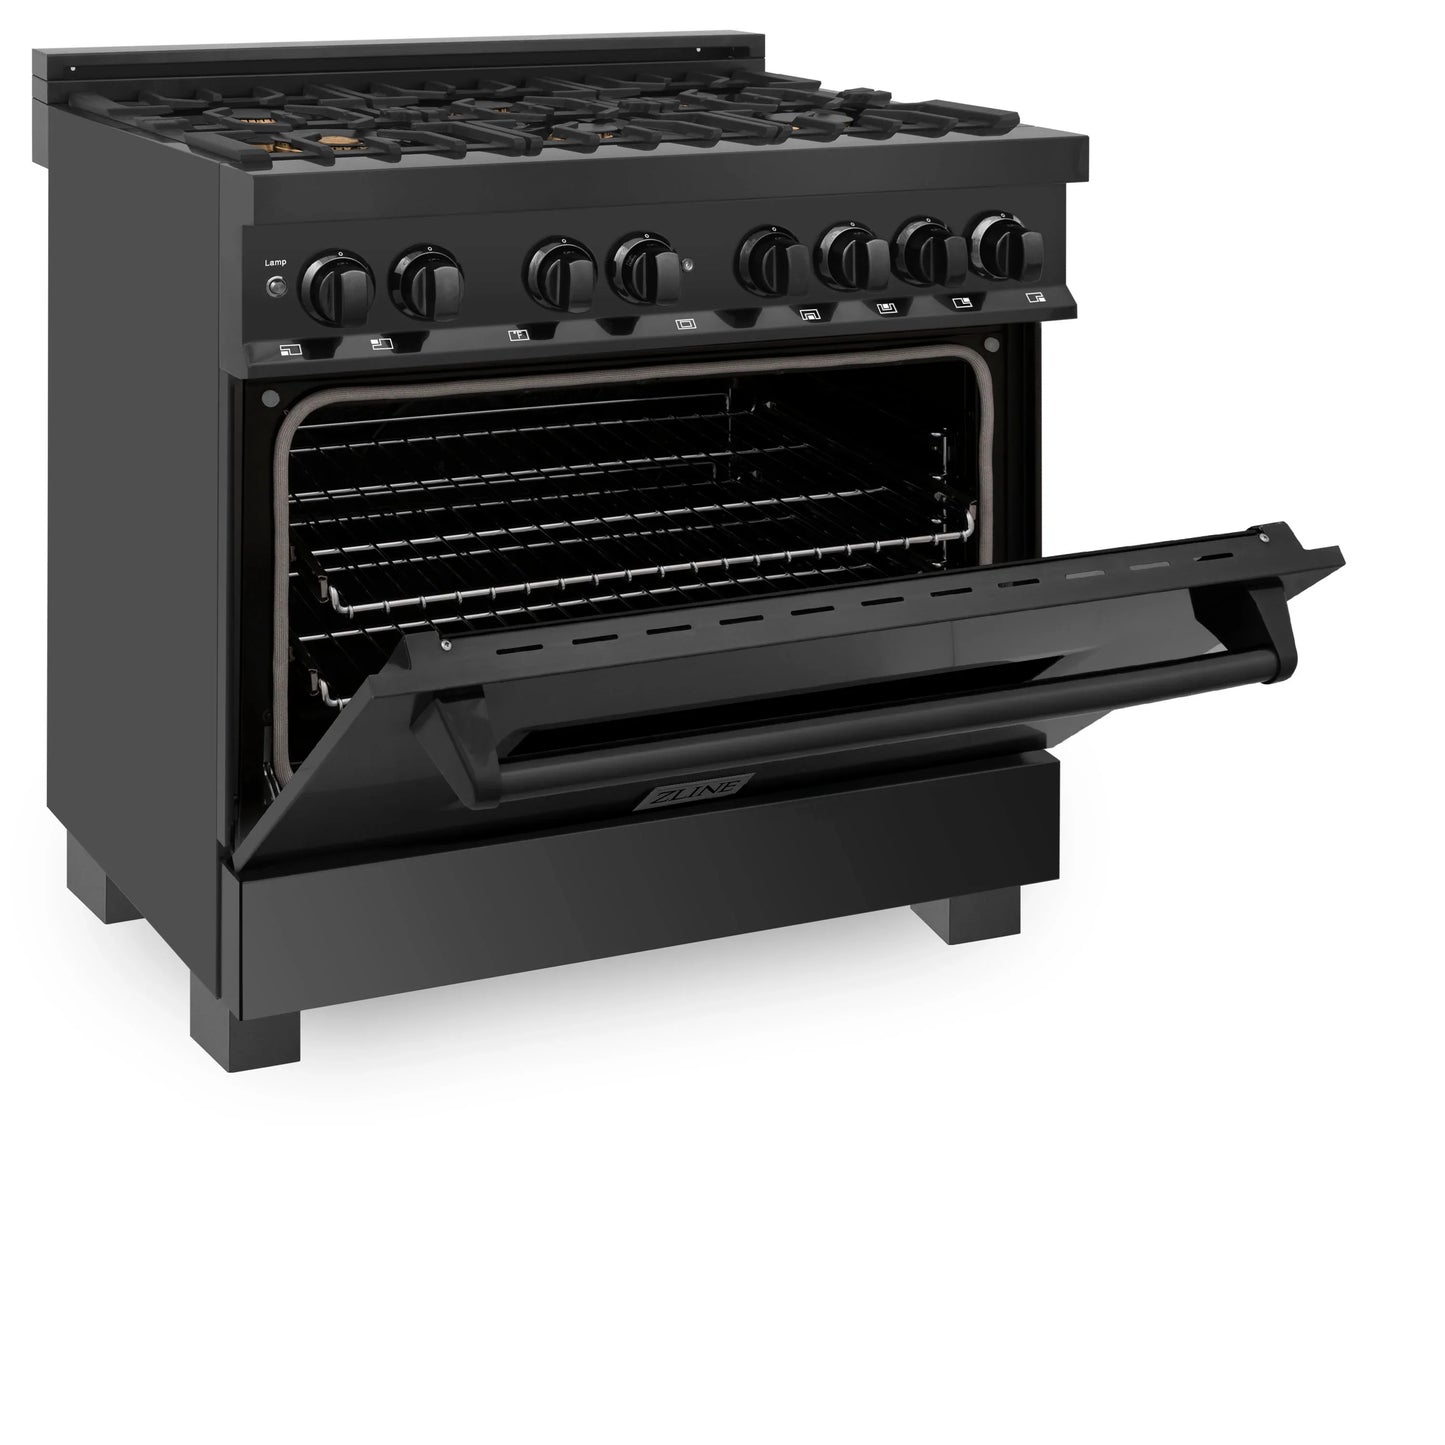 ZLINE 36" Dual Fuel Range with Gas Stove and Electric Oven in Black Stainless Steel with Brass Burners (RAB-BR-36)